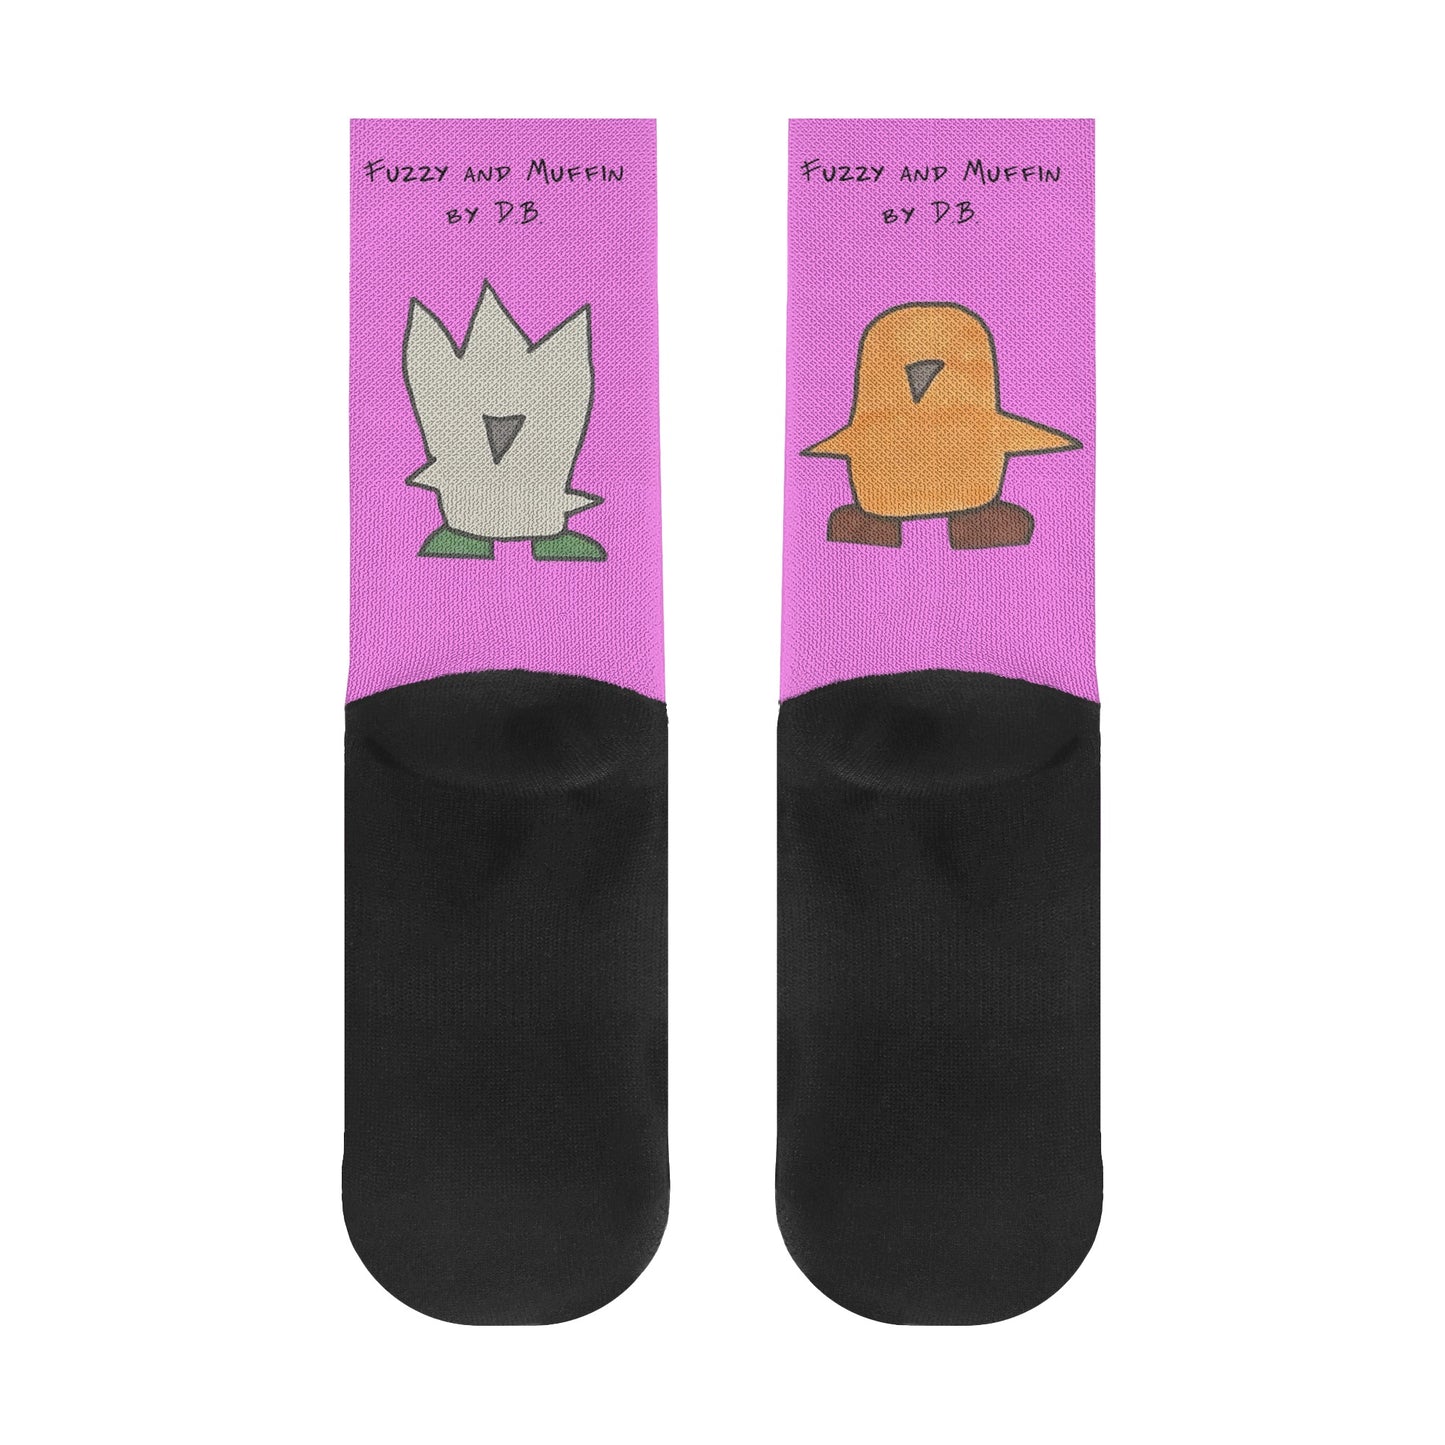 Fuzzy and Muffin by D.B. Wearable Art Comfy Funky Socks Sensory Friendly Seamless Toe (Pink)